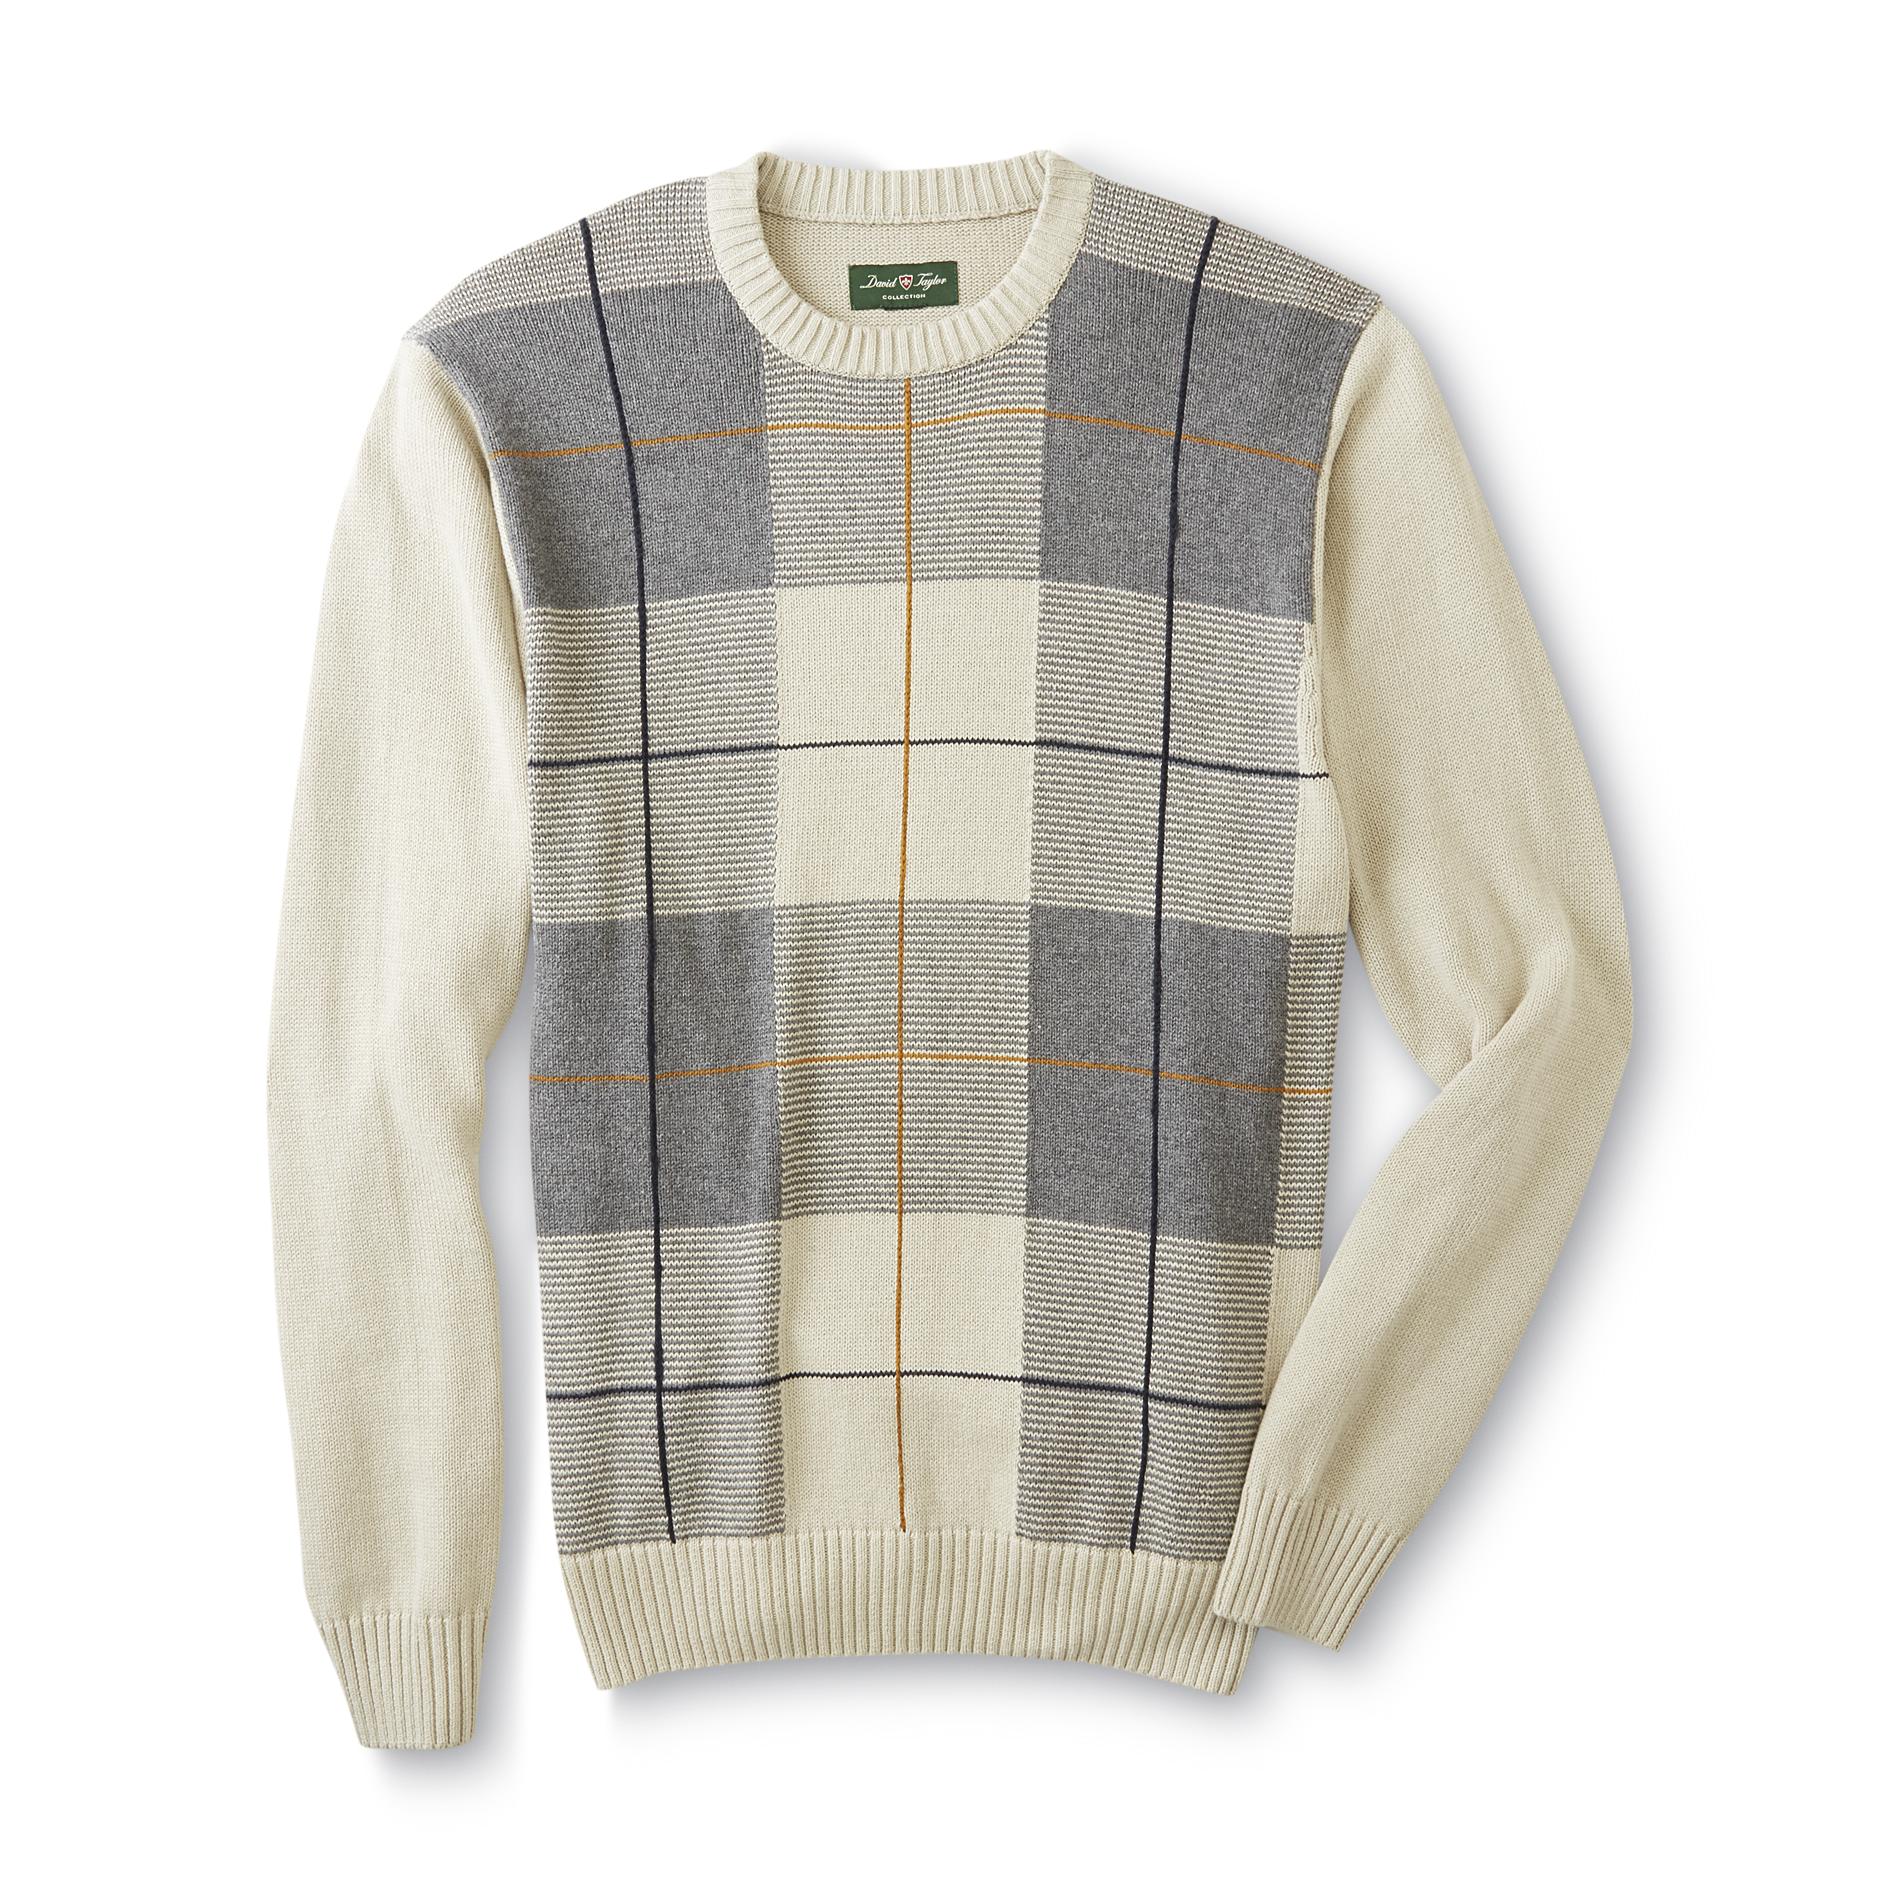 David Taylor Collection Men's Knit Sweater - Plaid